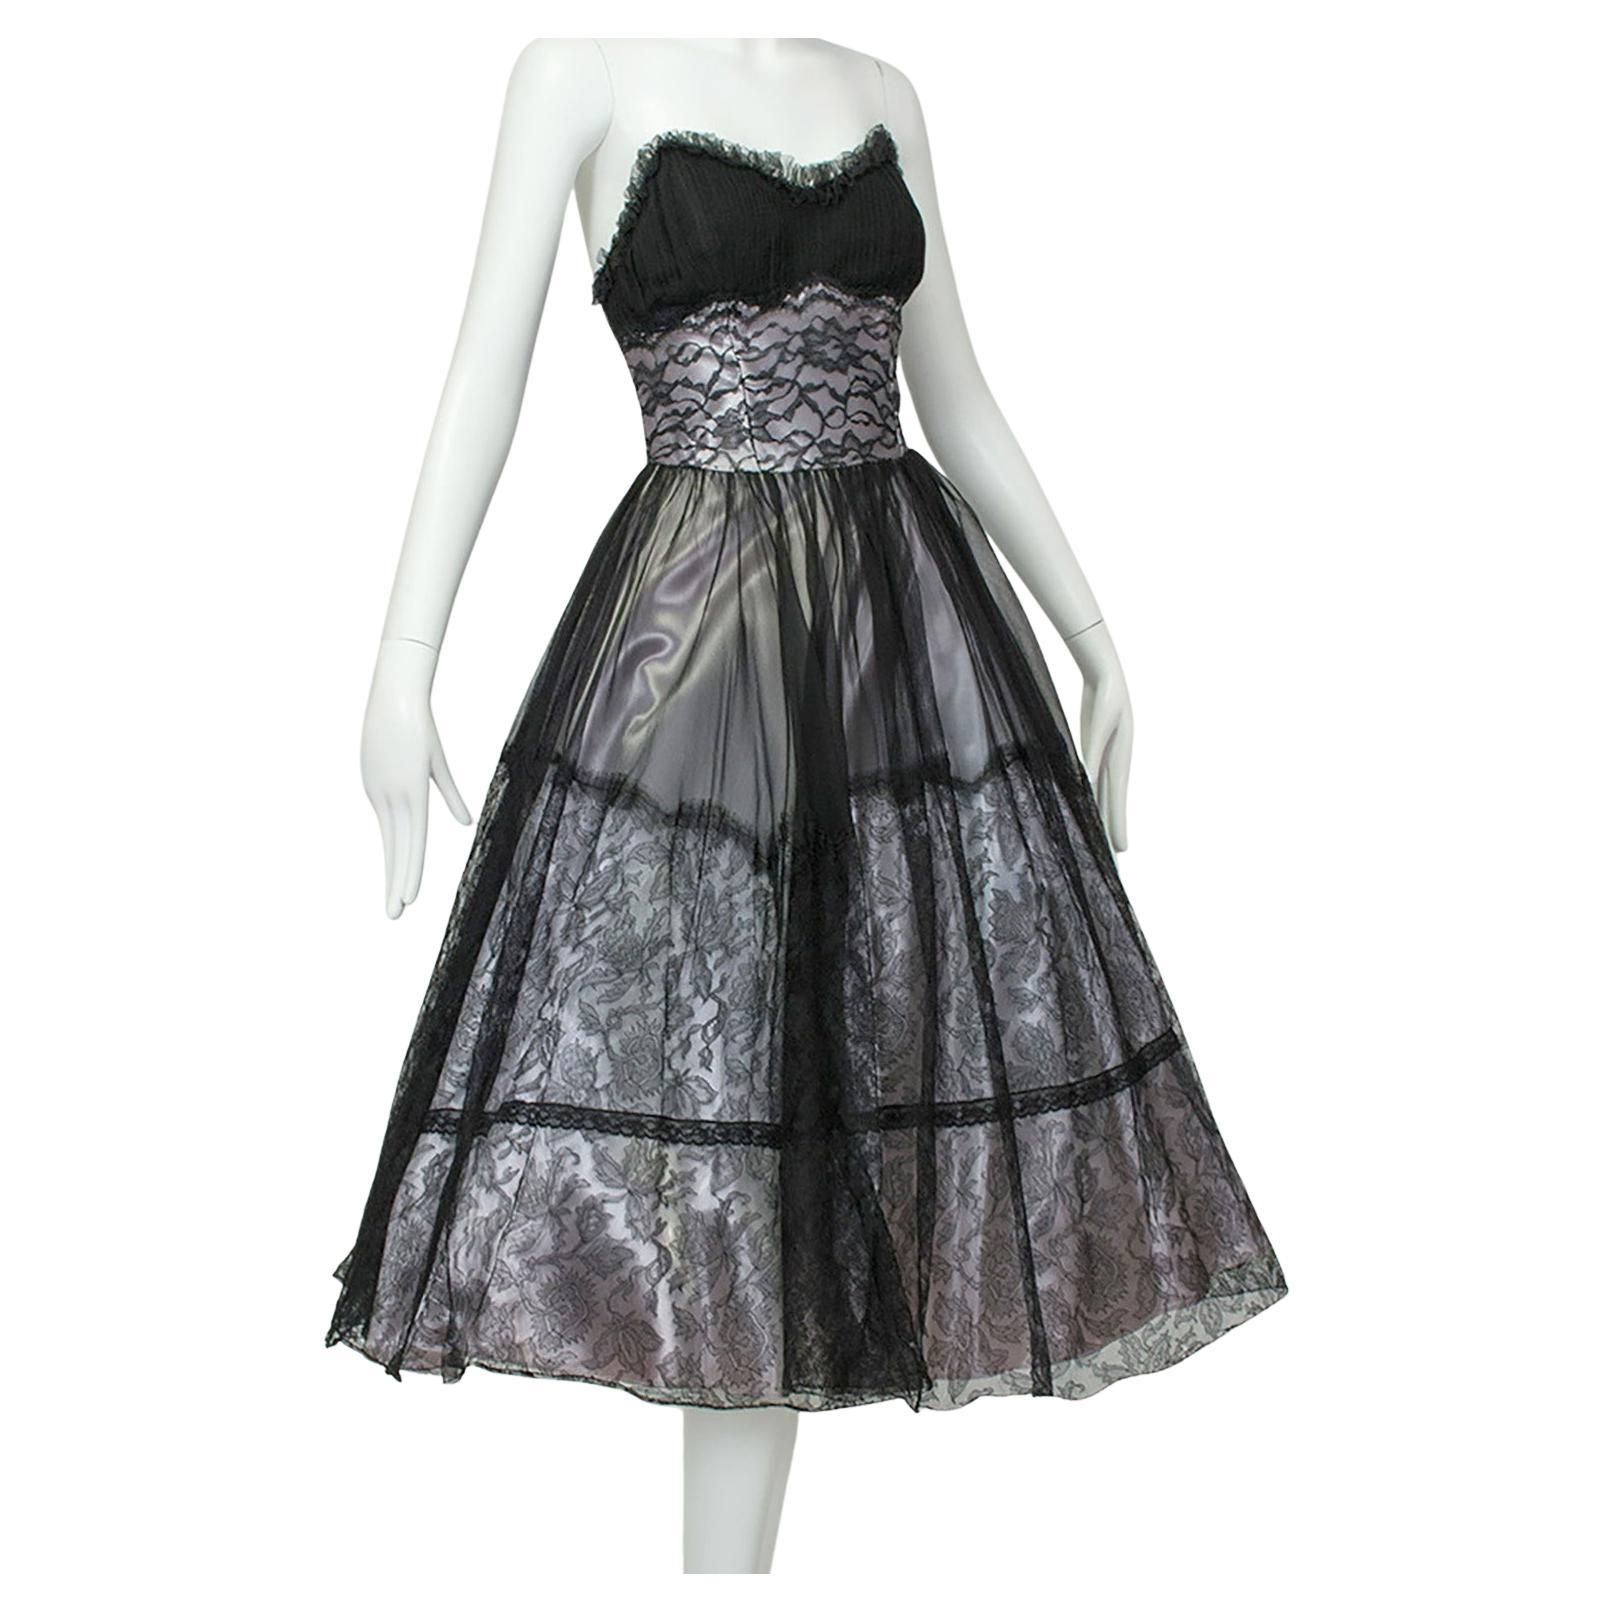 Black and Silver *Larger Size* Ombré New Look Strapless Party Dress – L, 1950s For Sale